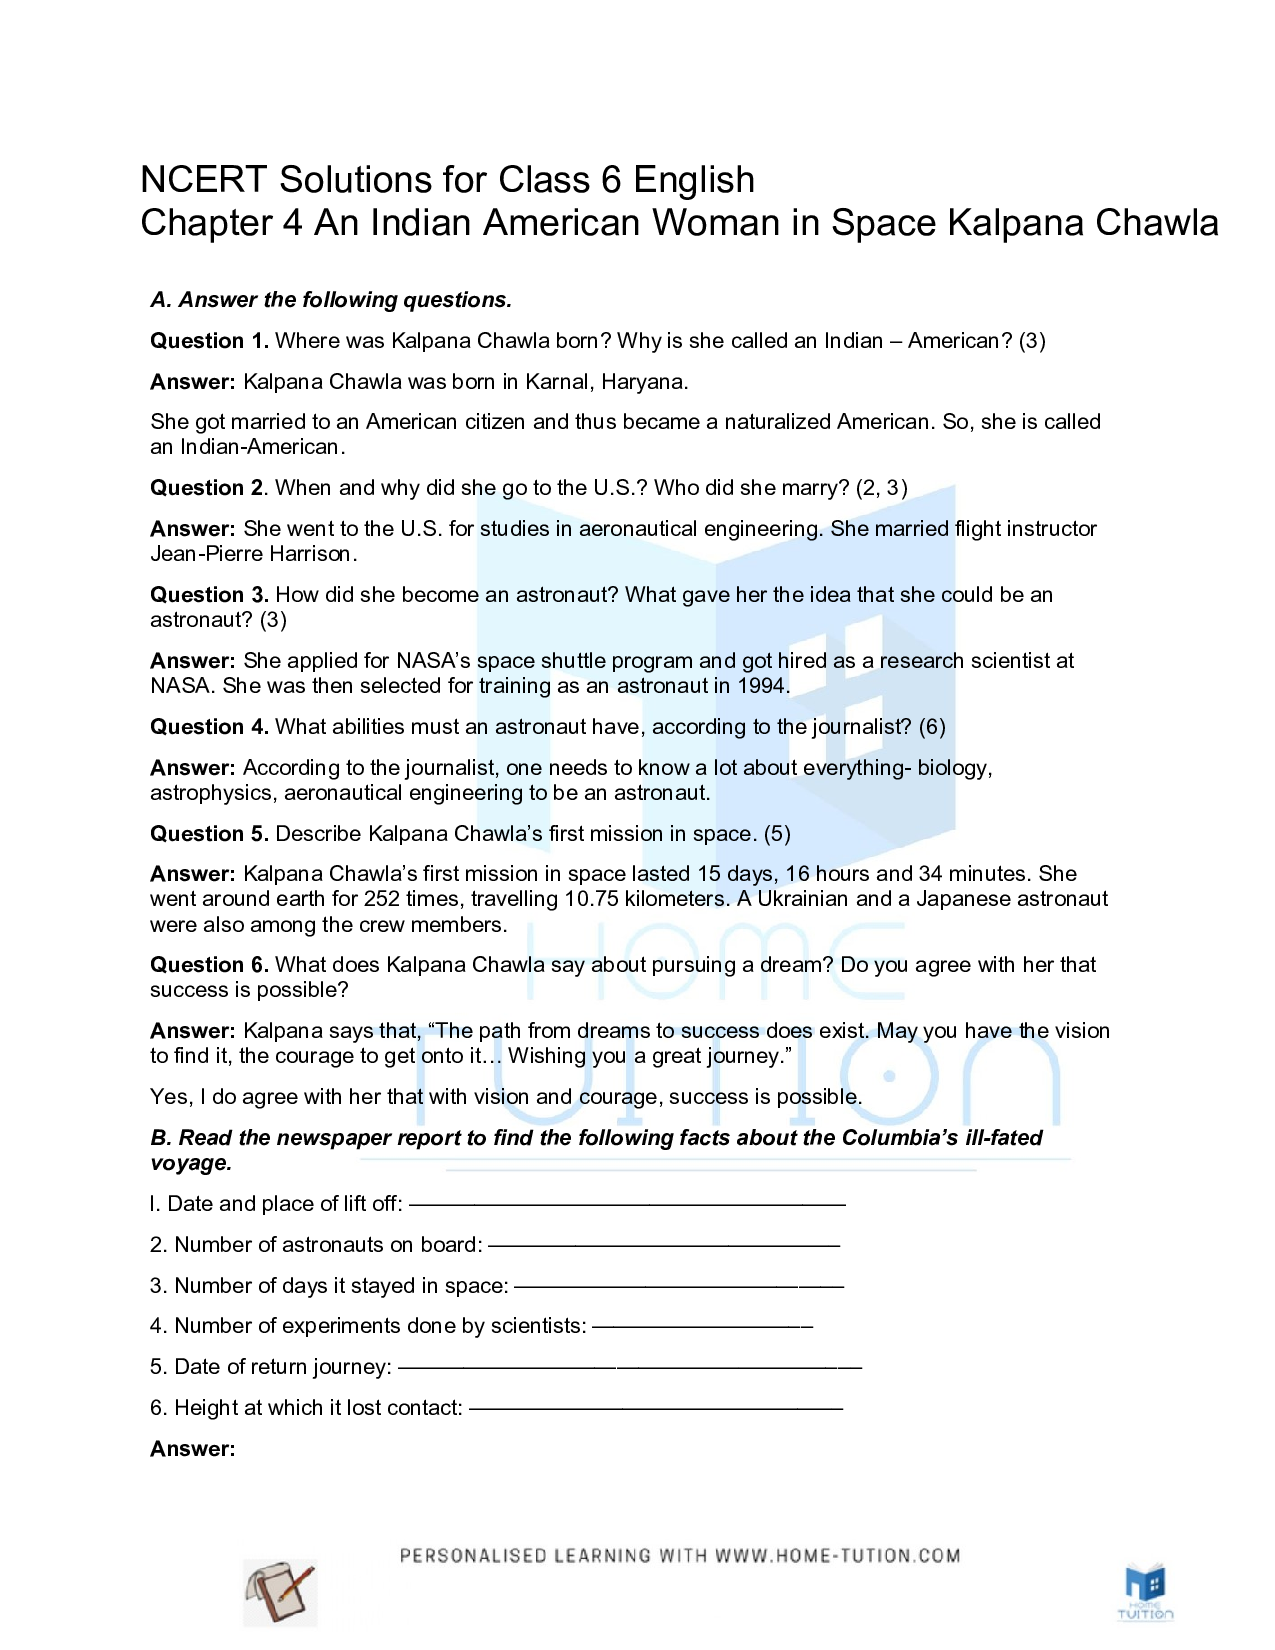 Chapter 4 An Indian American Woman in Space